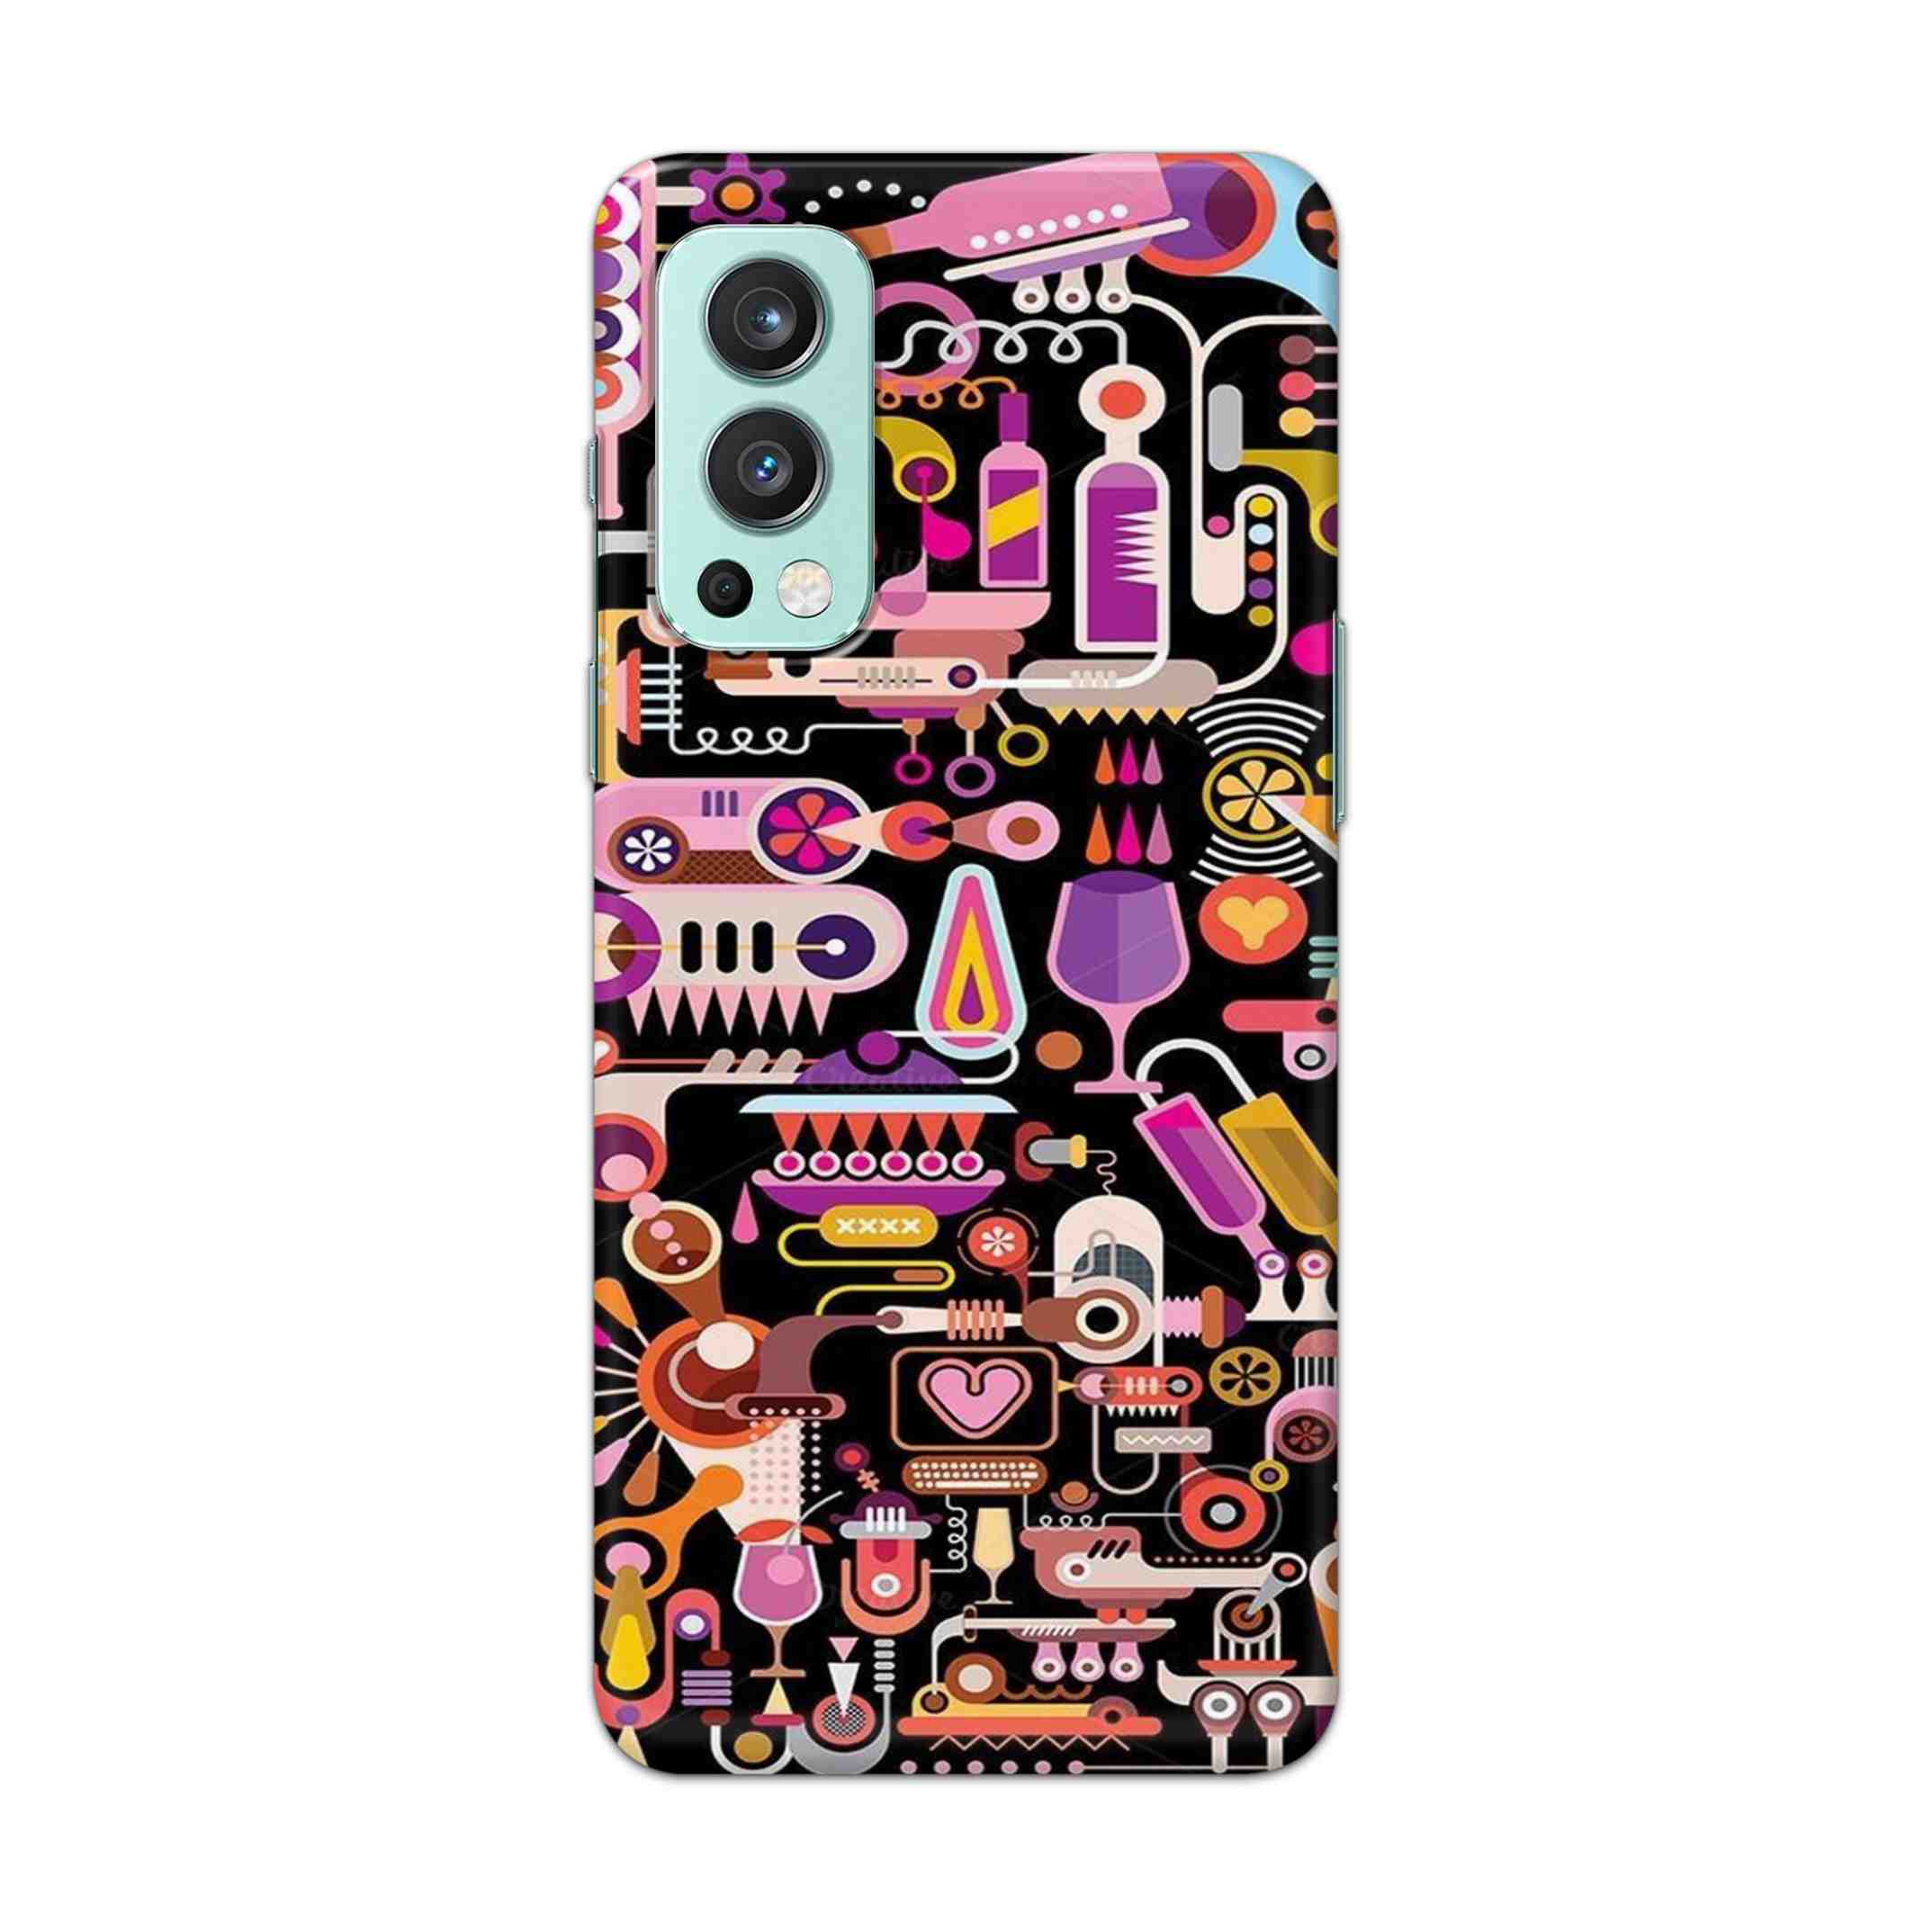 Buy Lab Art Hard Back Mobile Phone Case Cover For OnePlus Nord 2 5G Online